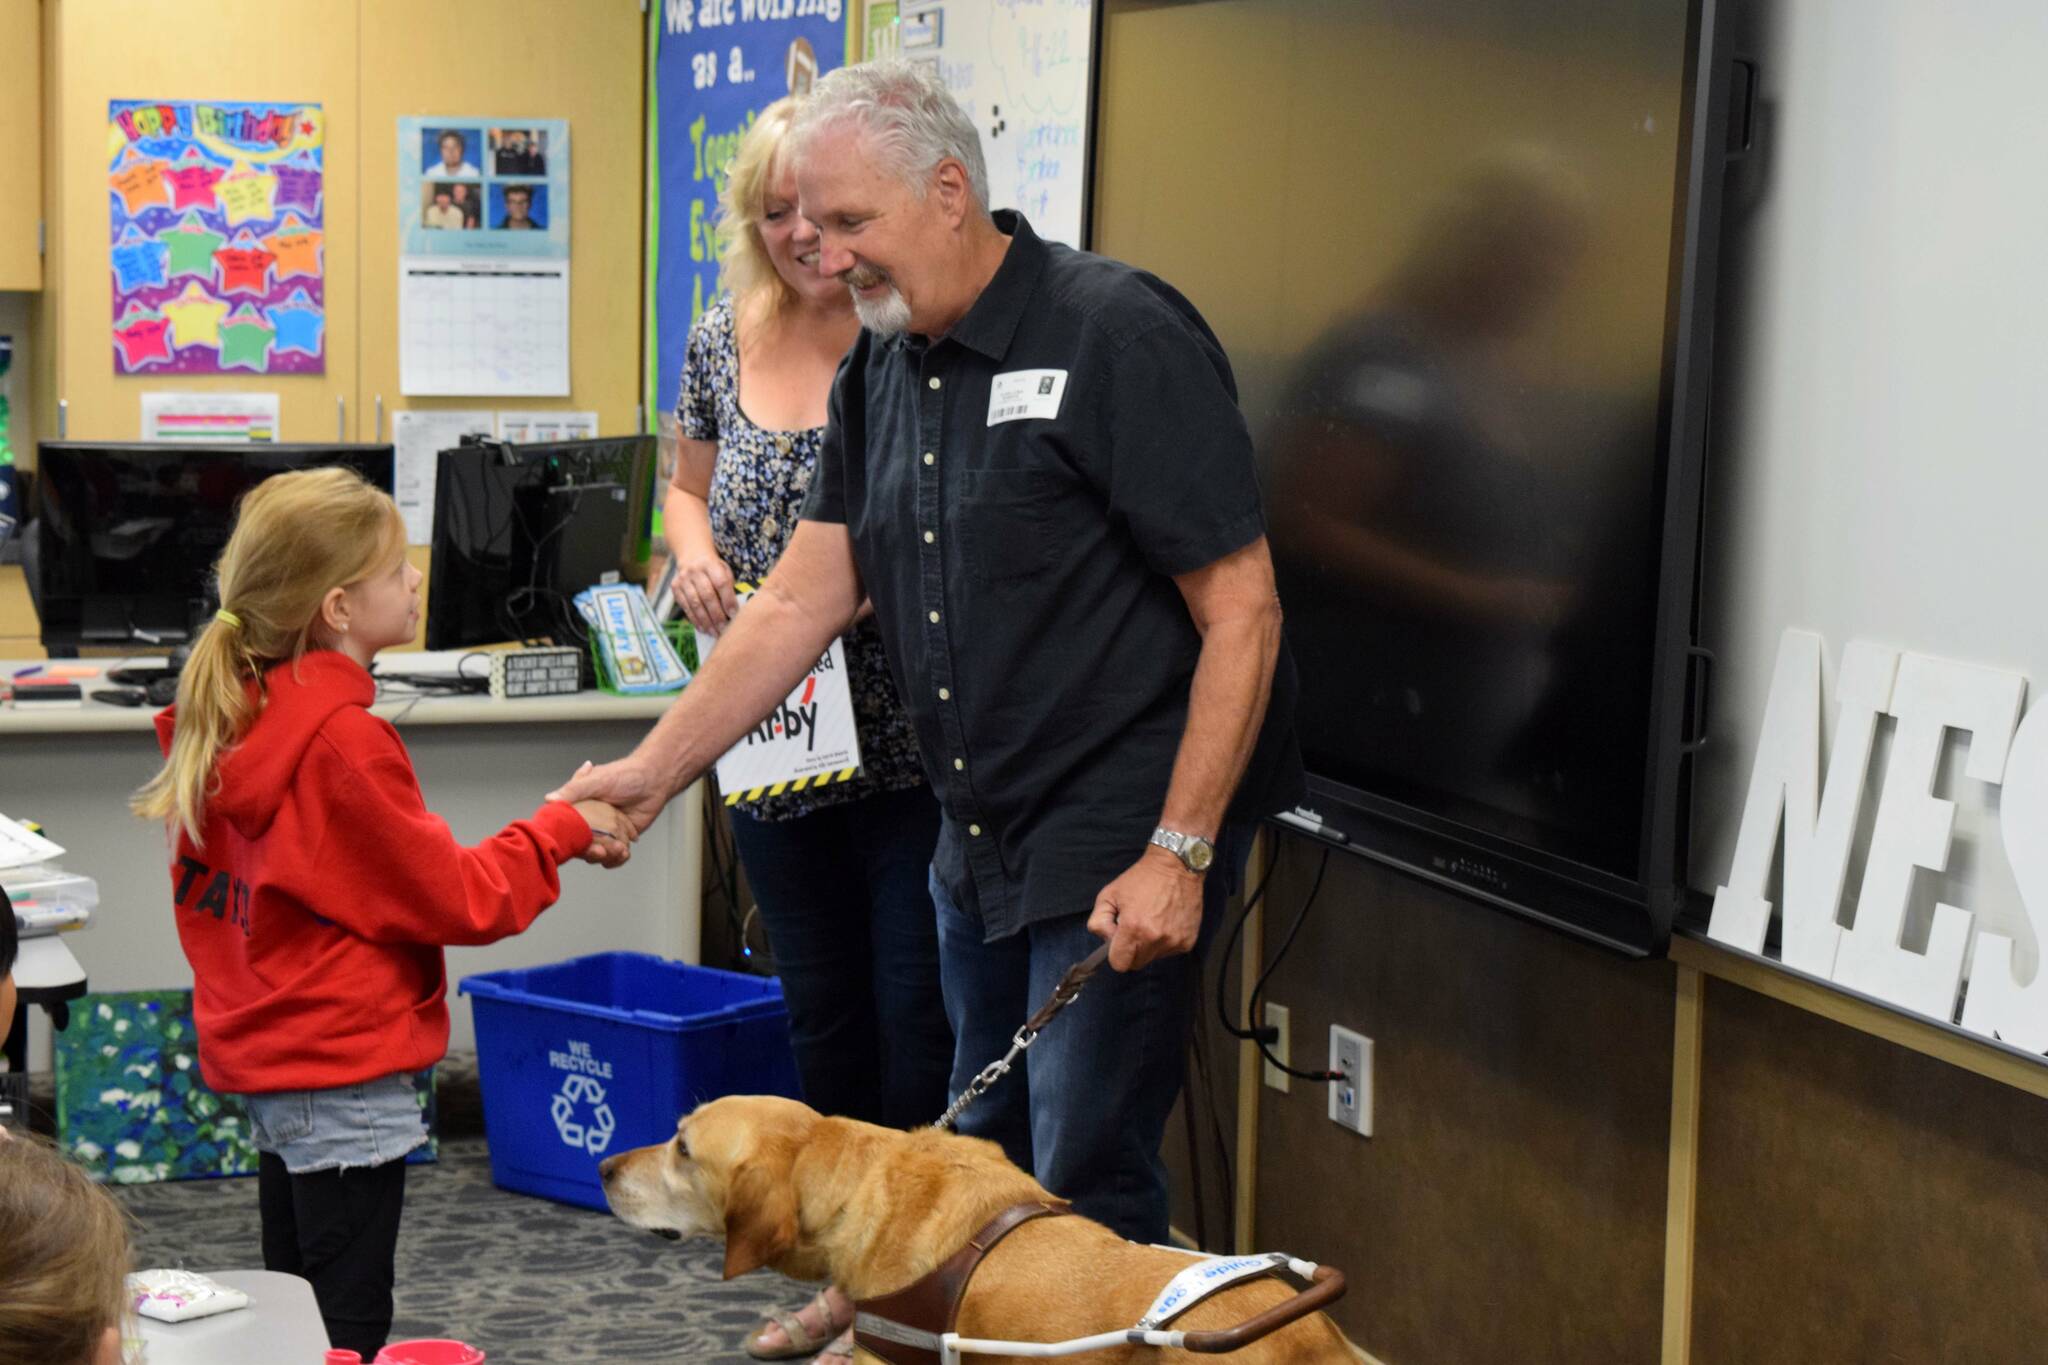 Clark Roberts greets a student at North Bend Elementary on Sept. 16. Photo by Conor Wilson/Valley Record